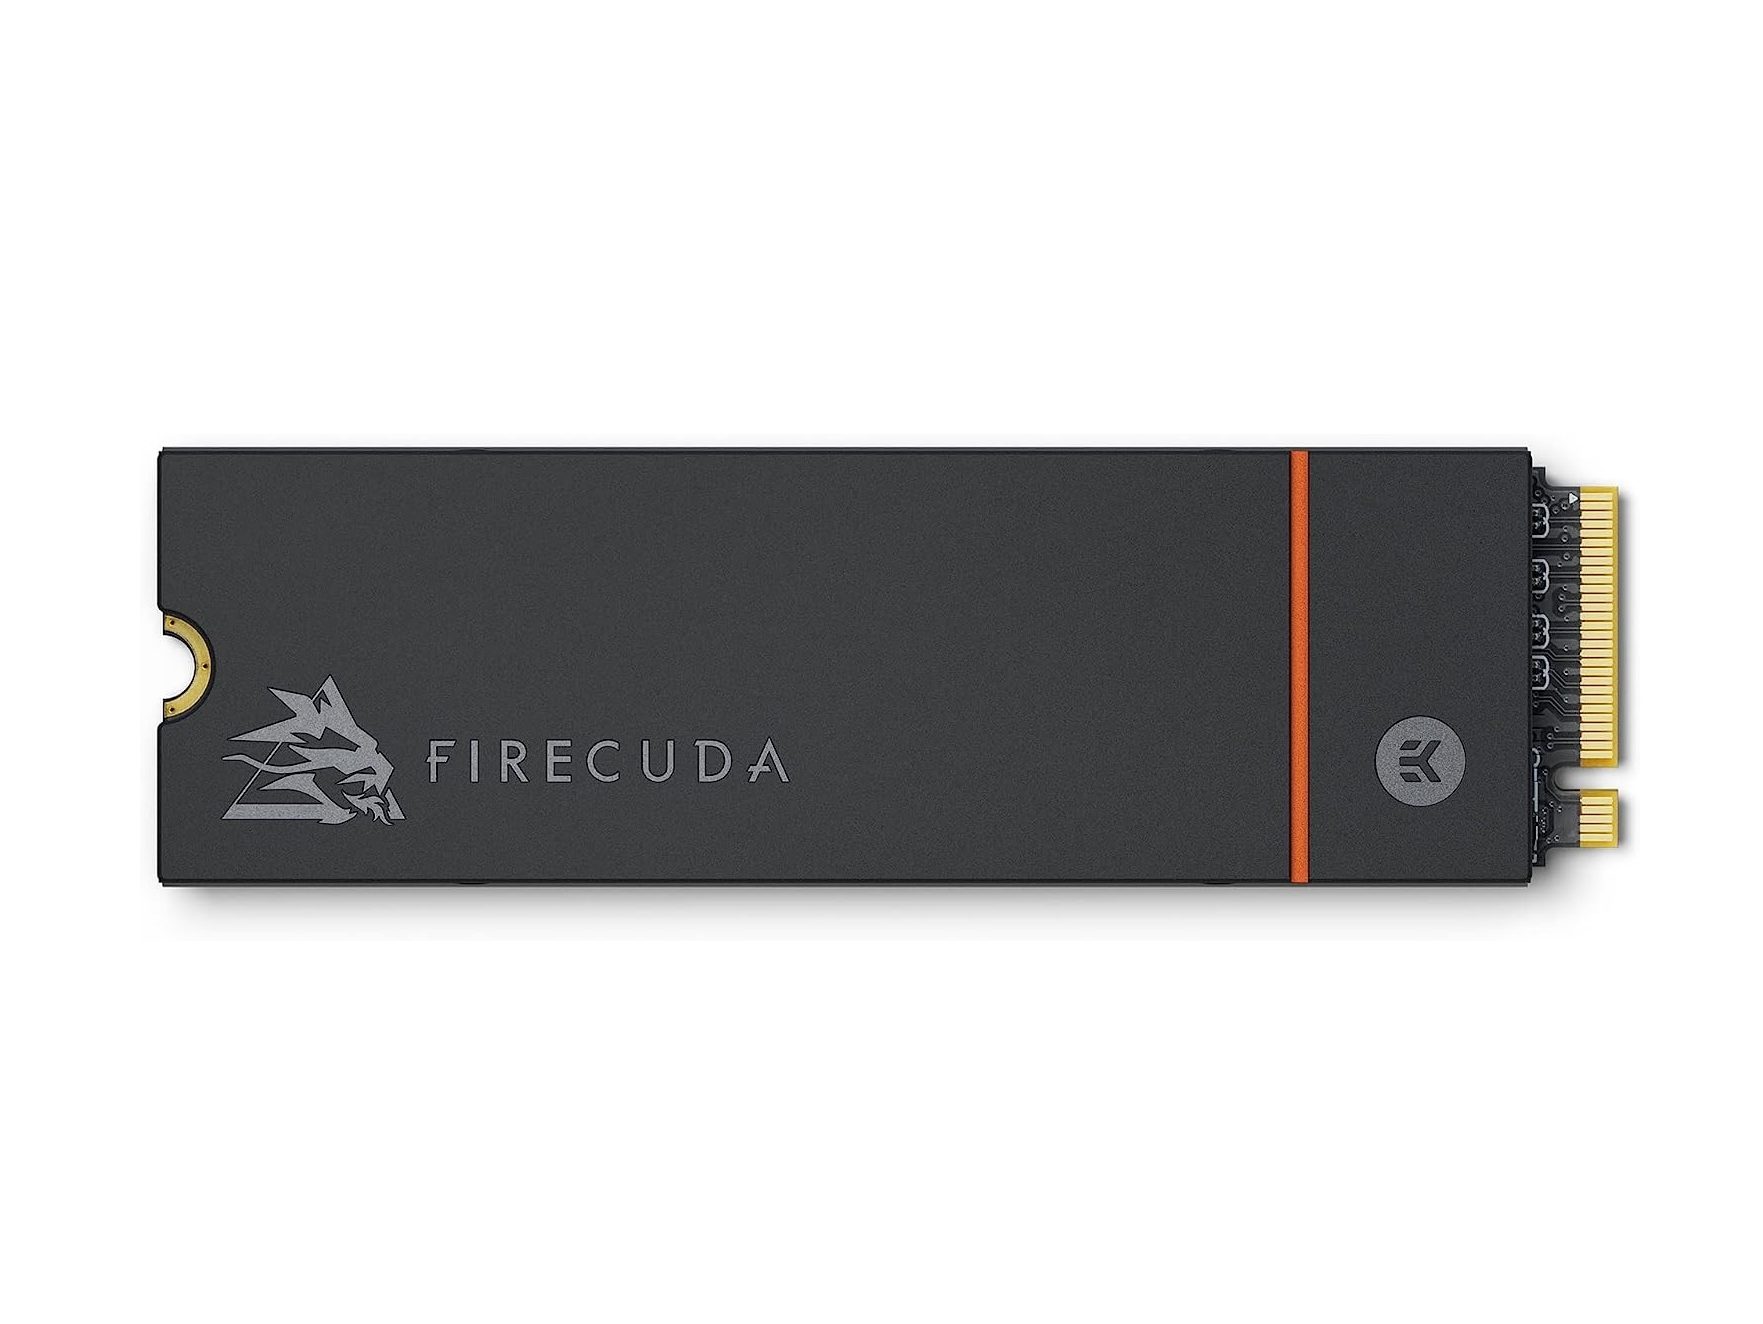 A view of the Seagate FireCuda 530 4TB with heat sink.